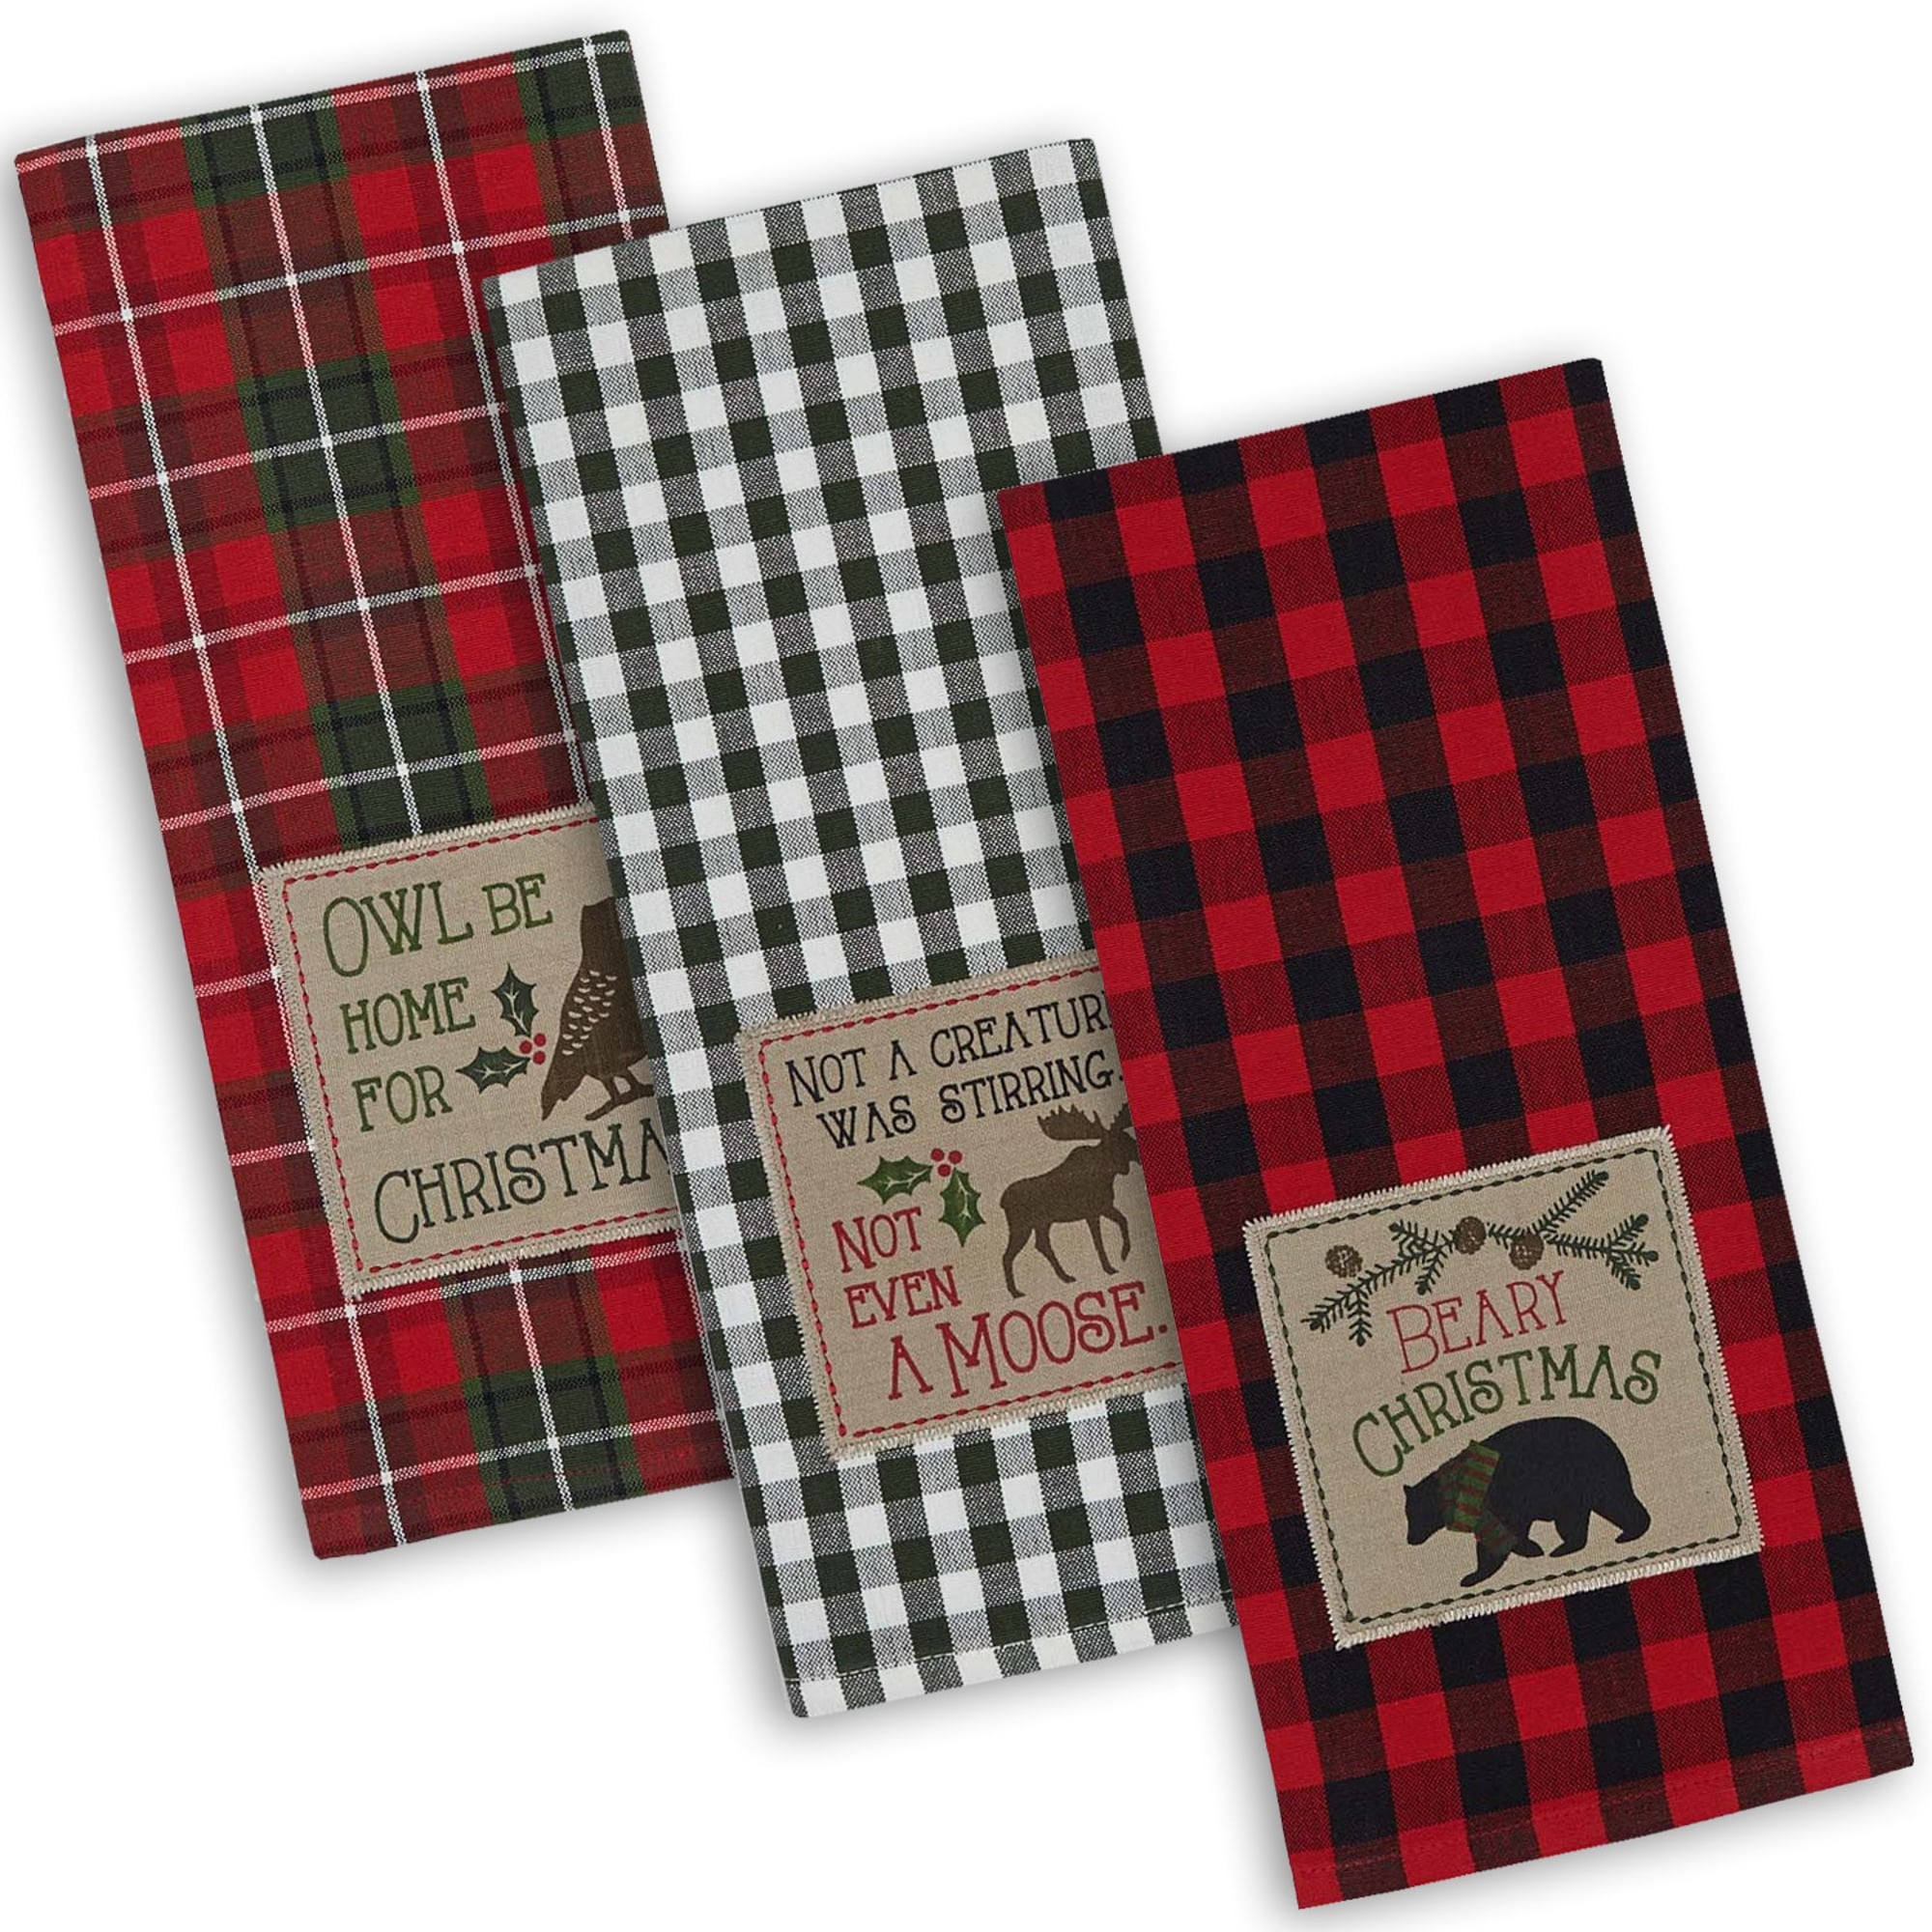 Design Imports Set of 2 Assorted Naughty Nice Kitchen Towels 